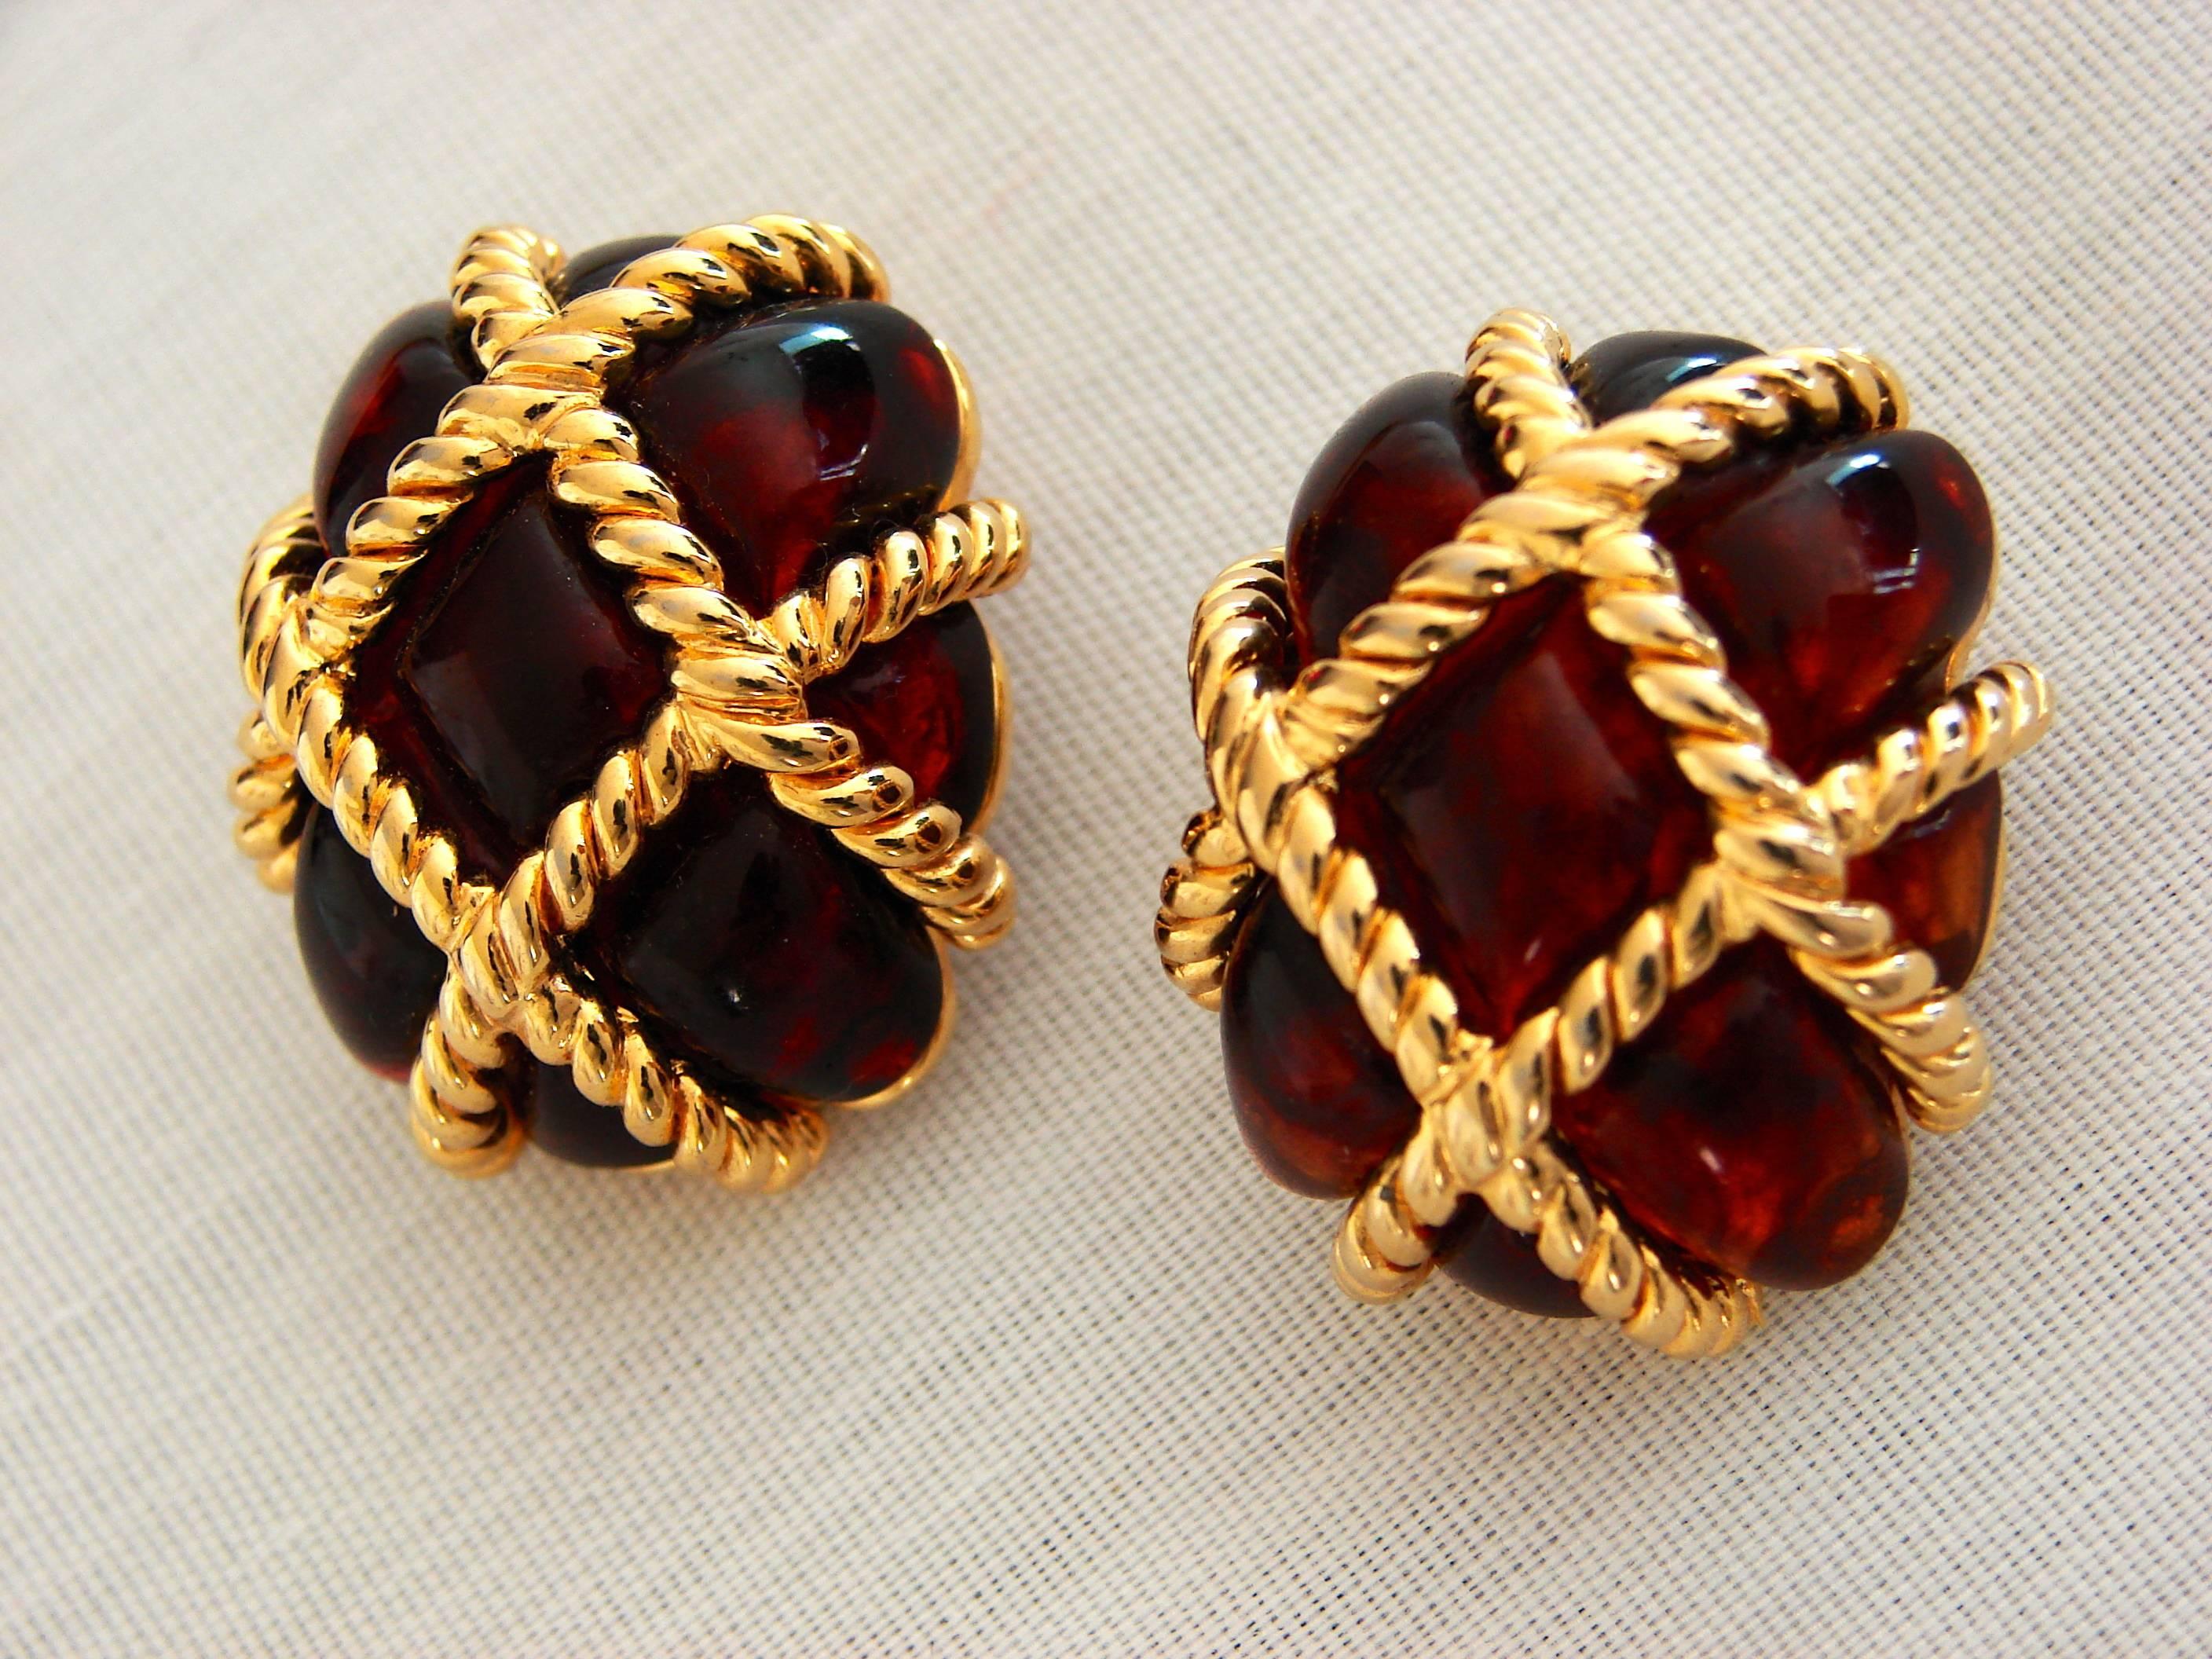 Contemporary Kenneth Jay Lane Gold Wire Basket Earrings with Rootbeer Stone Clip Style 1980s